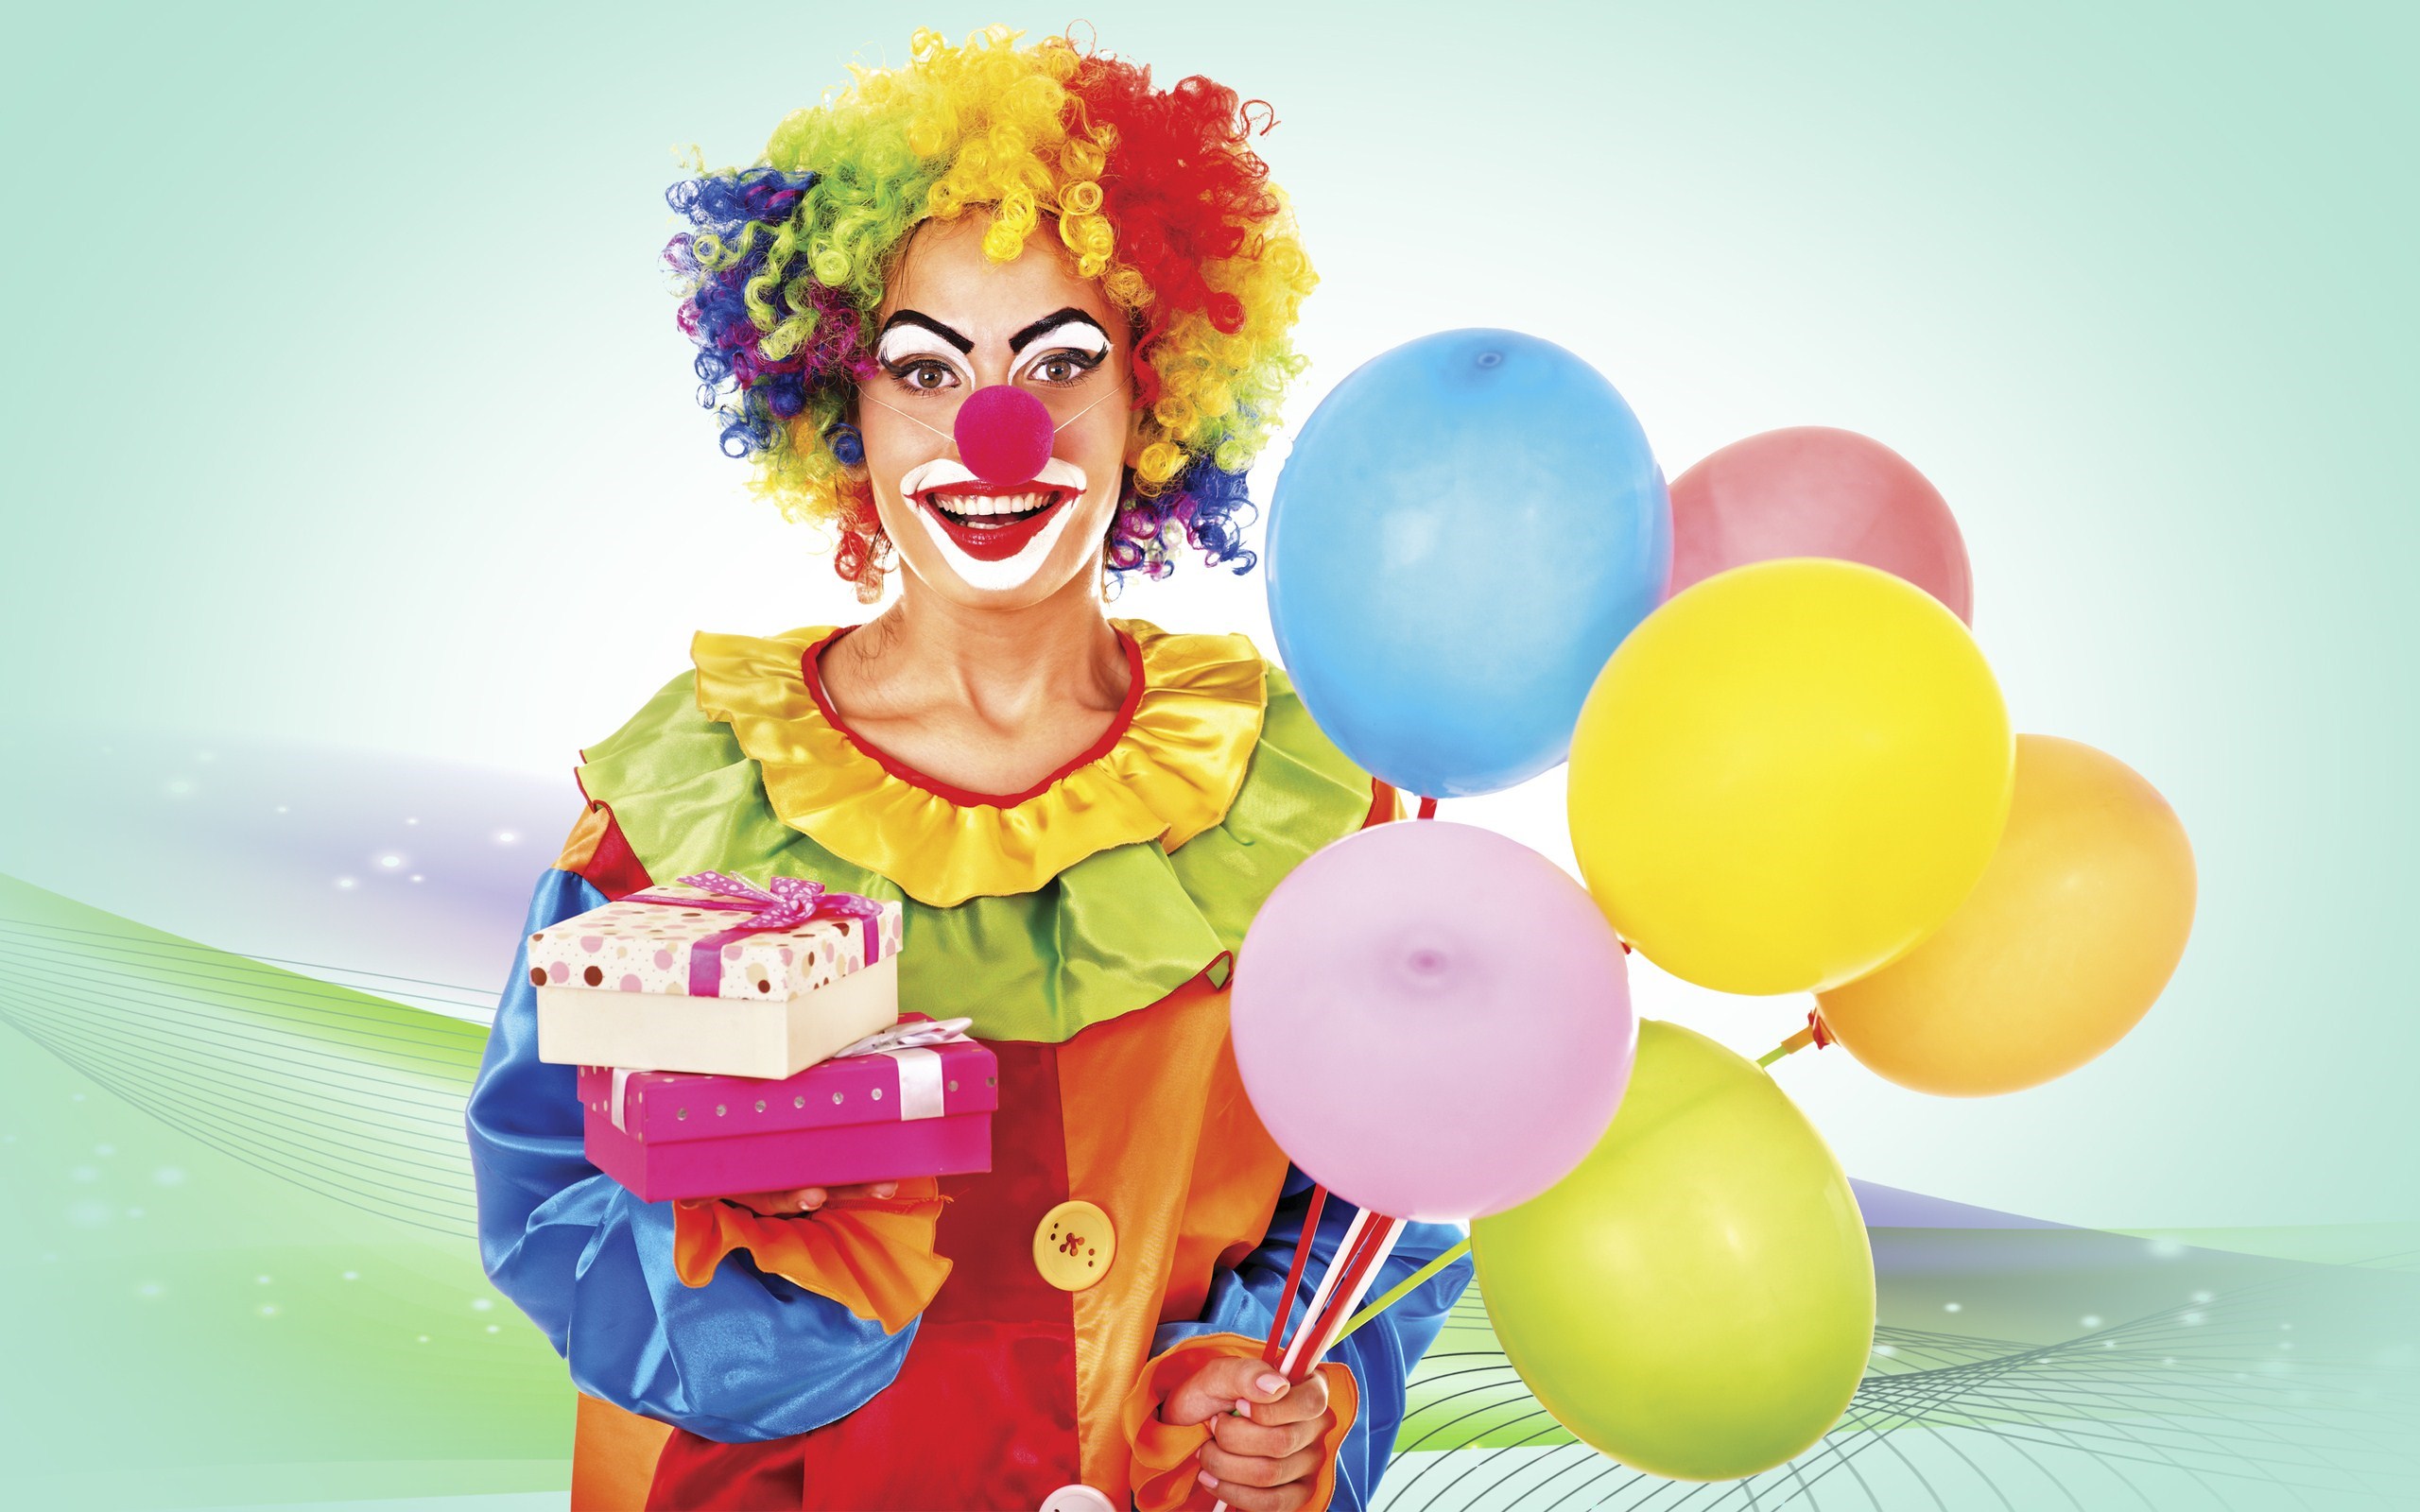 Funny Clown Balloons Gifts